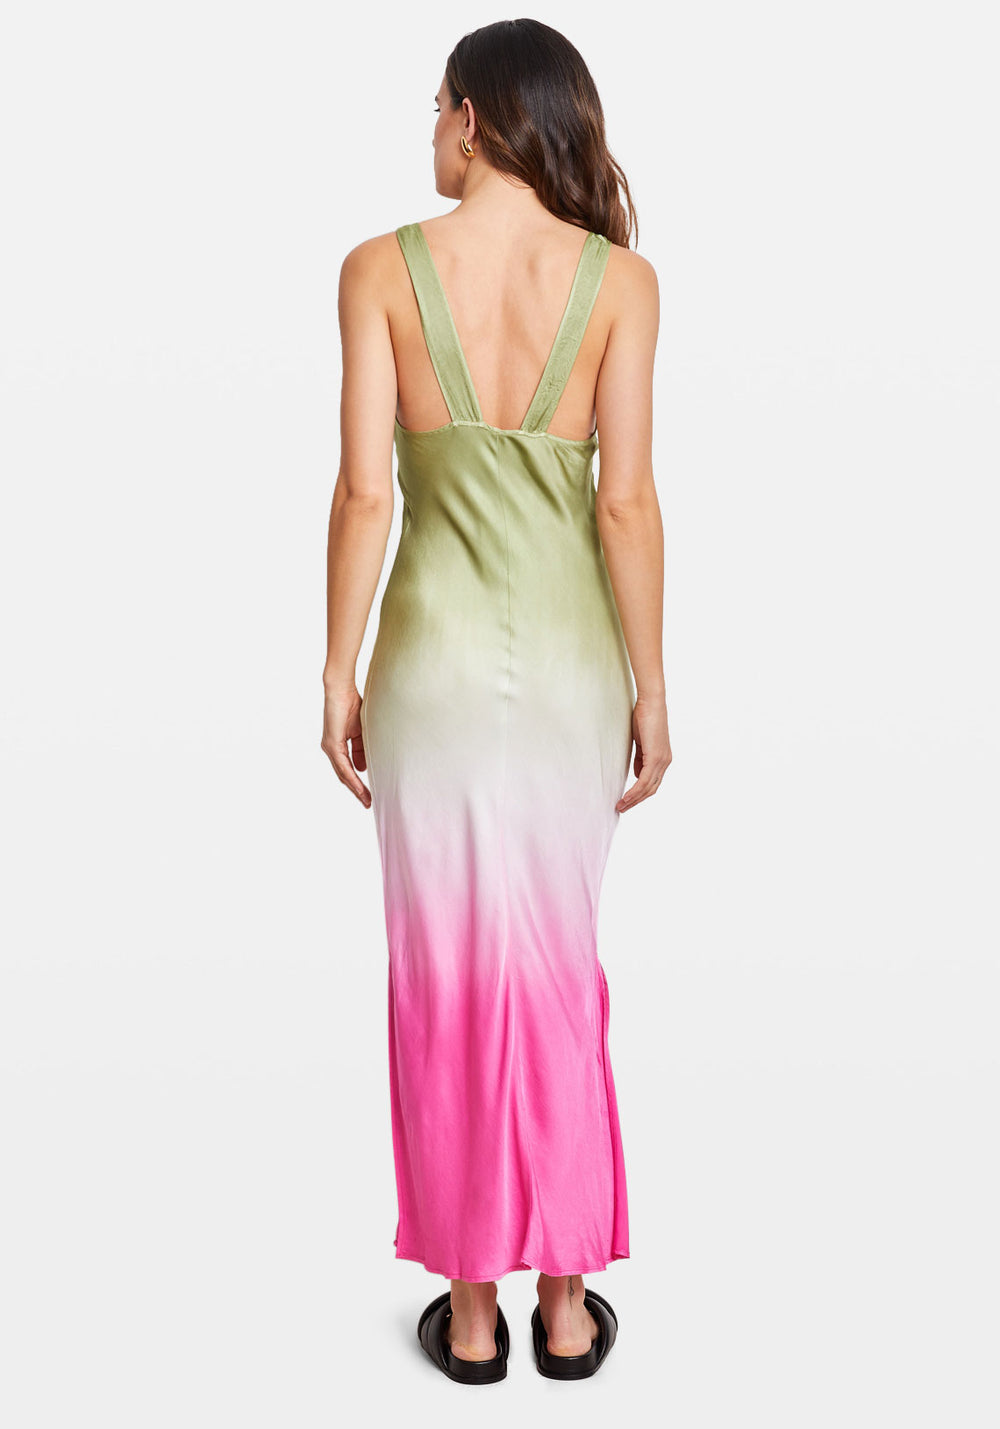 ALESSI DRESS OLIVE/HOT PINK OMBRE